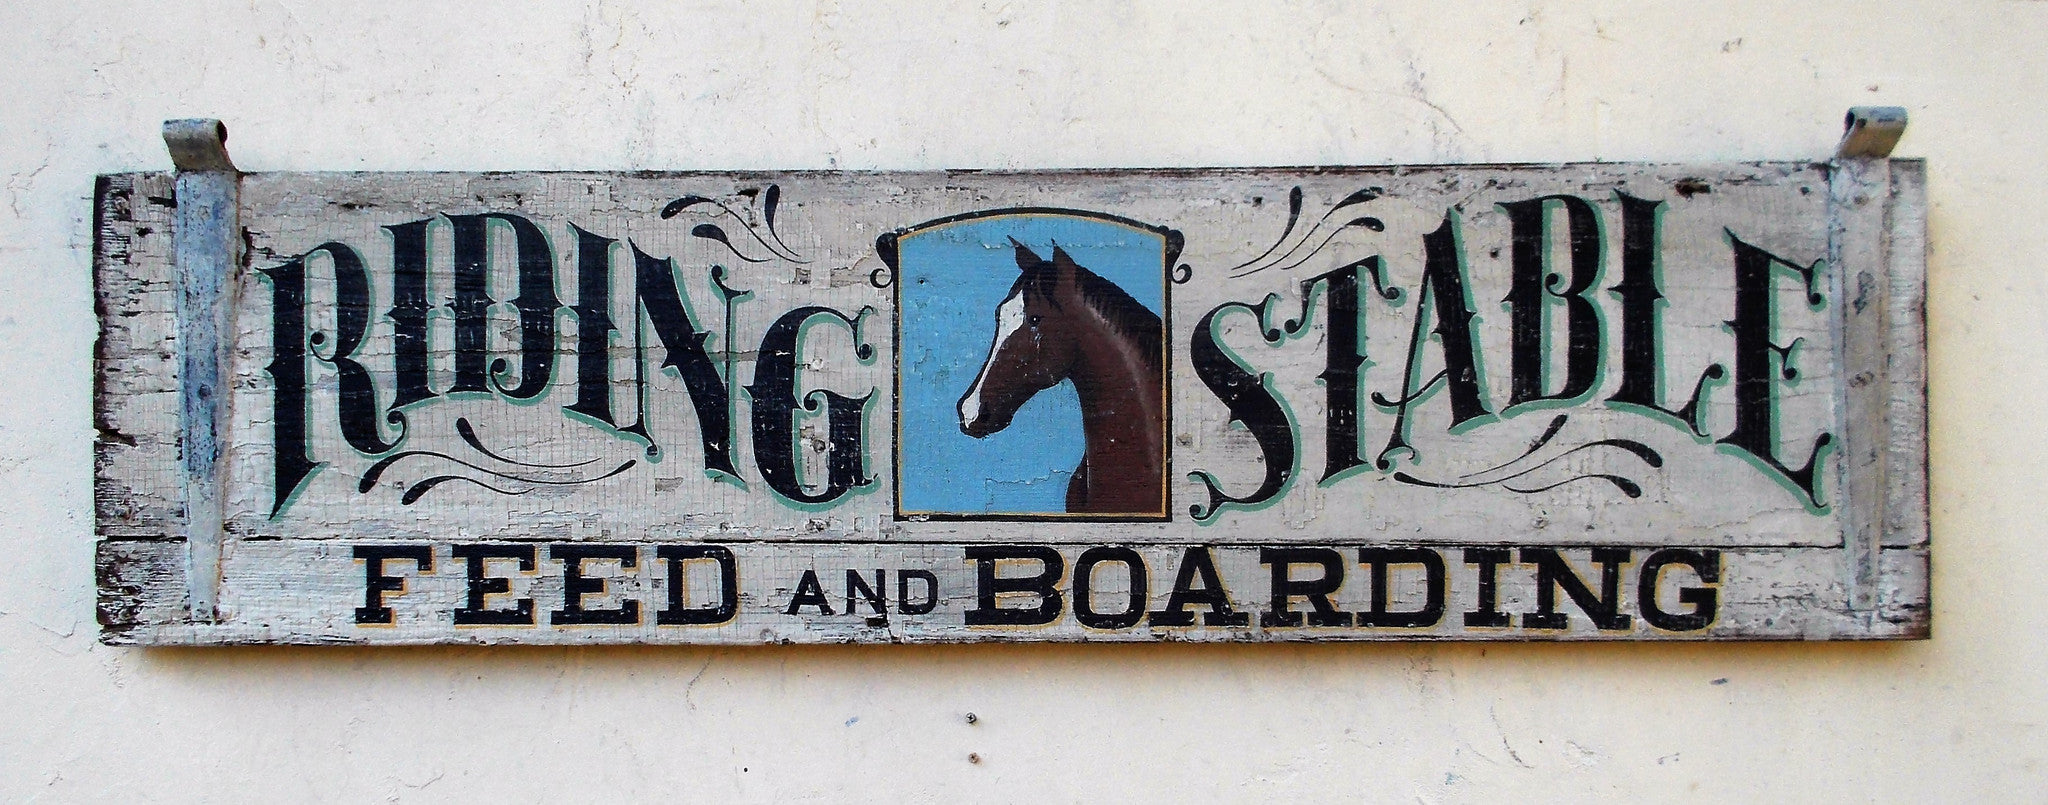 Riding Stable, Feed and Boarding